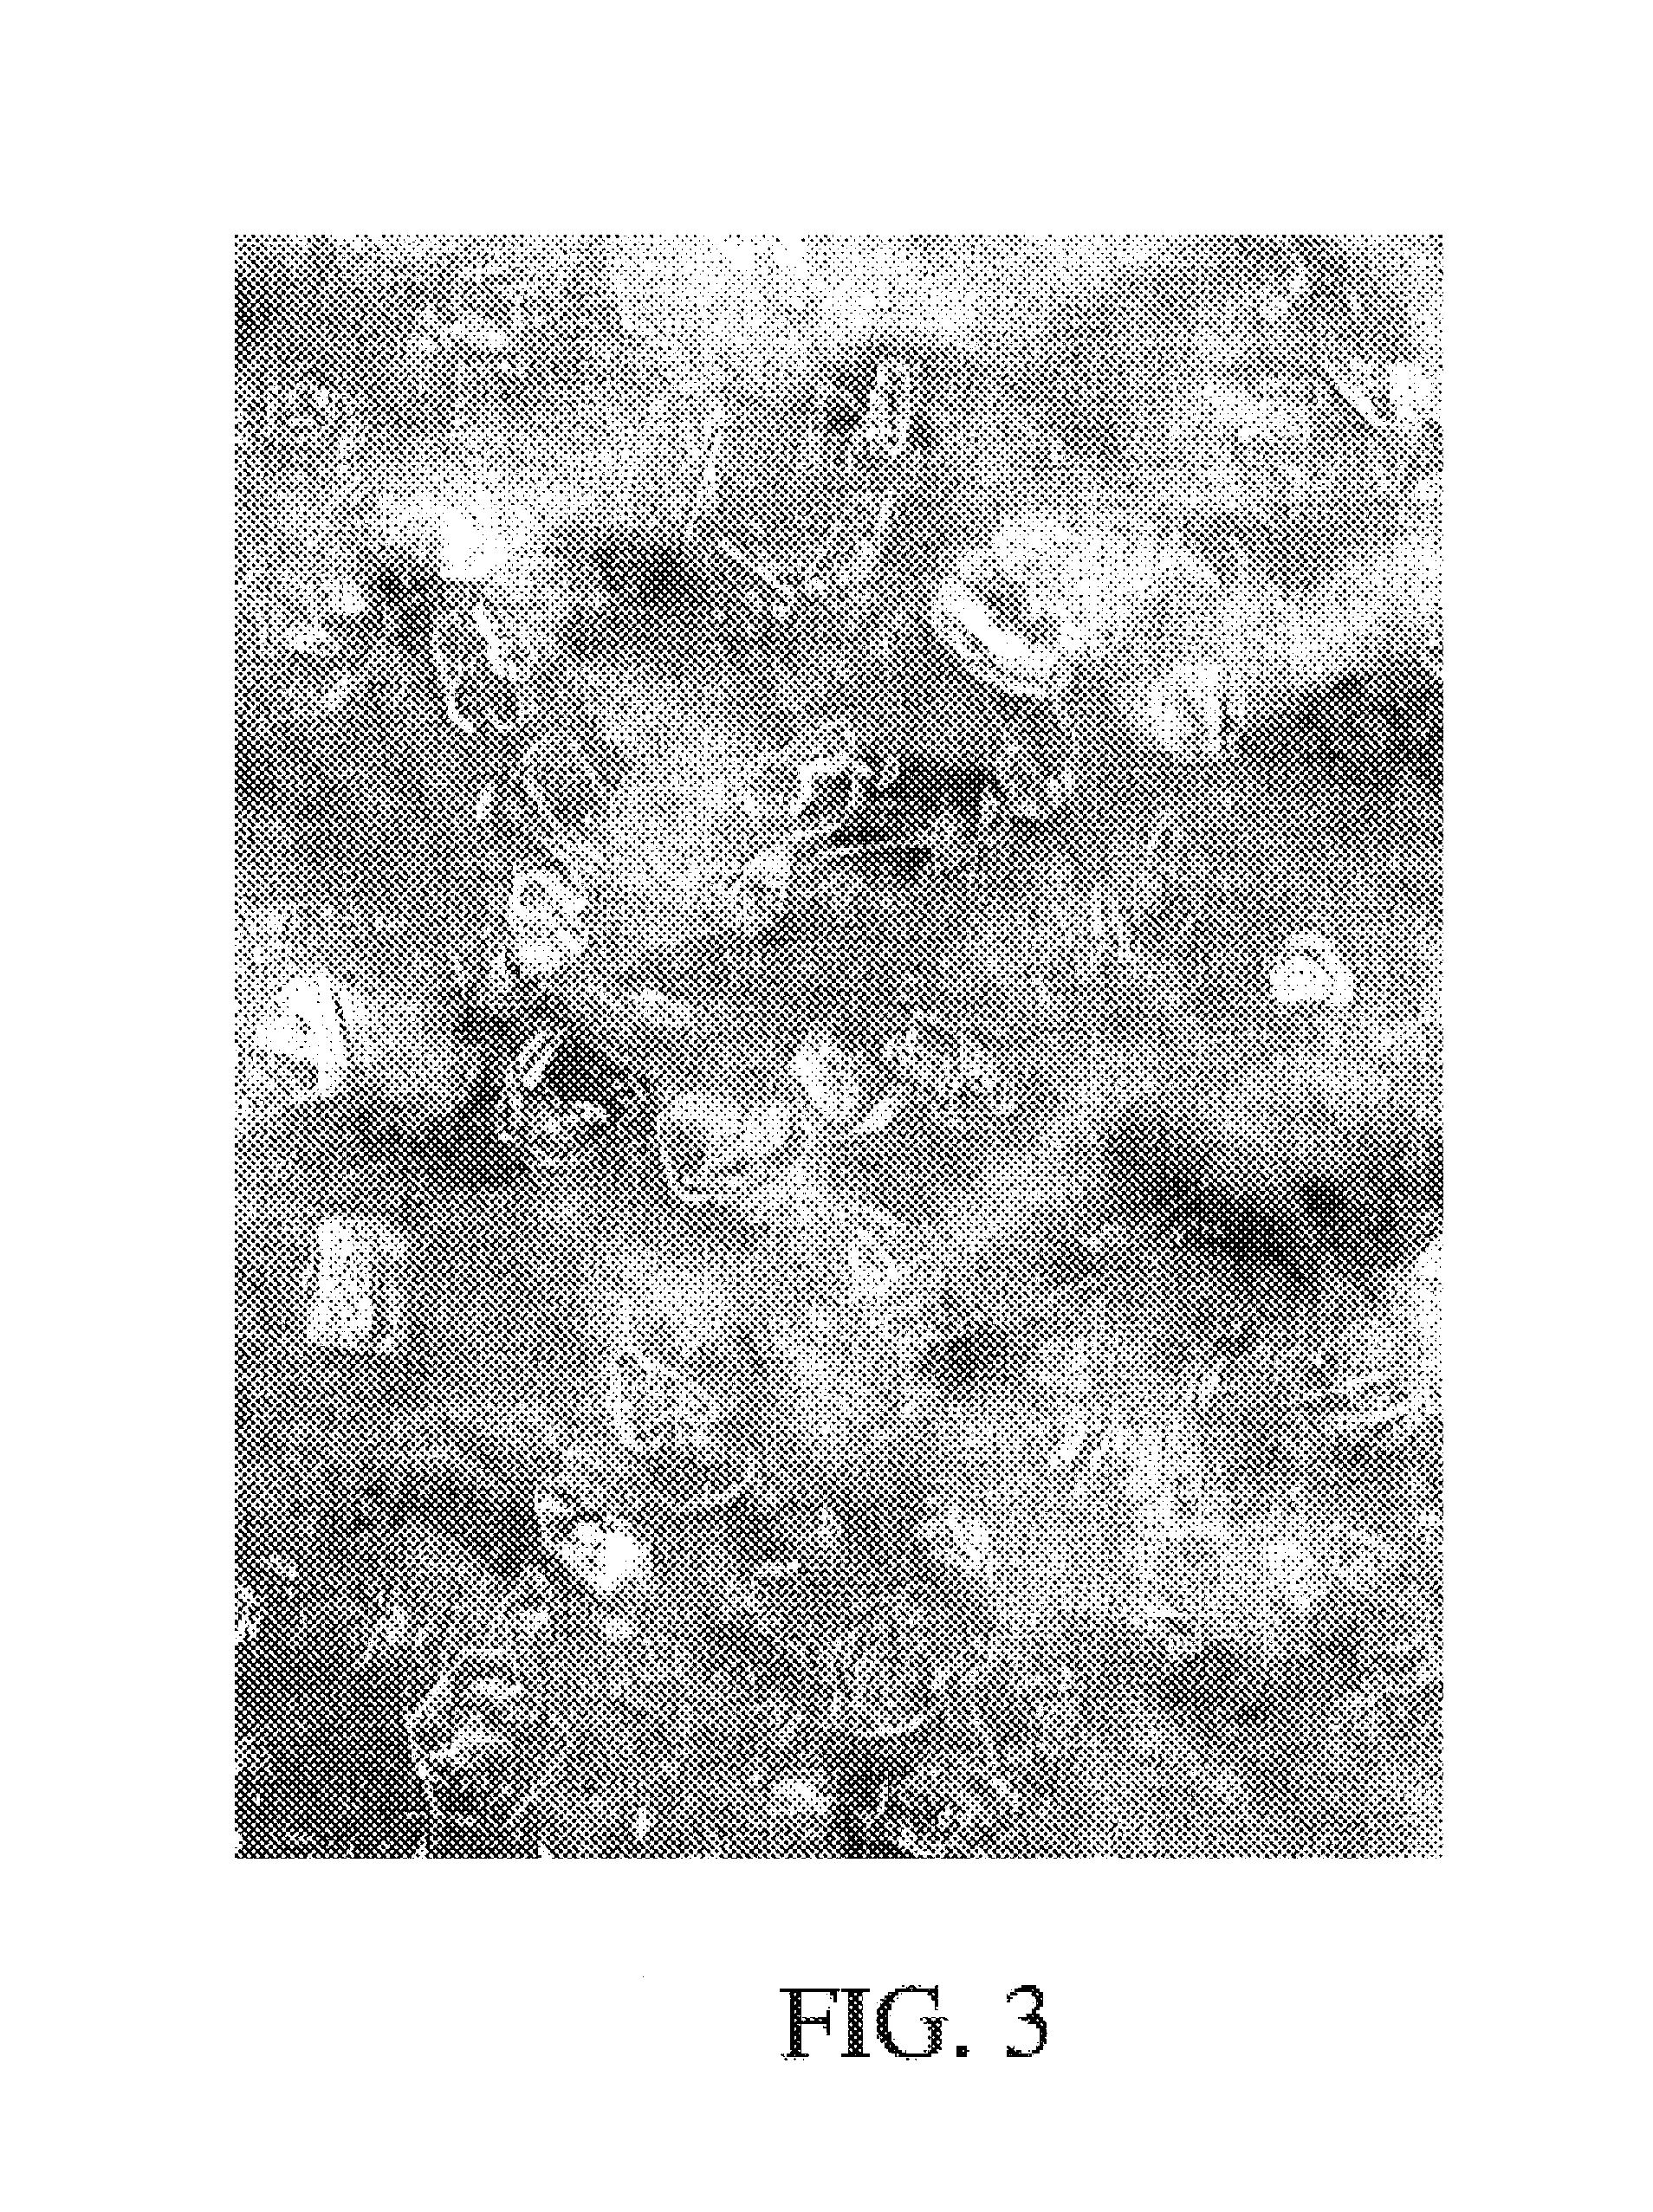 Surface-coated hard material, production method for this, and use of the same